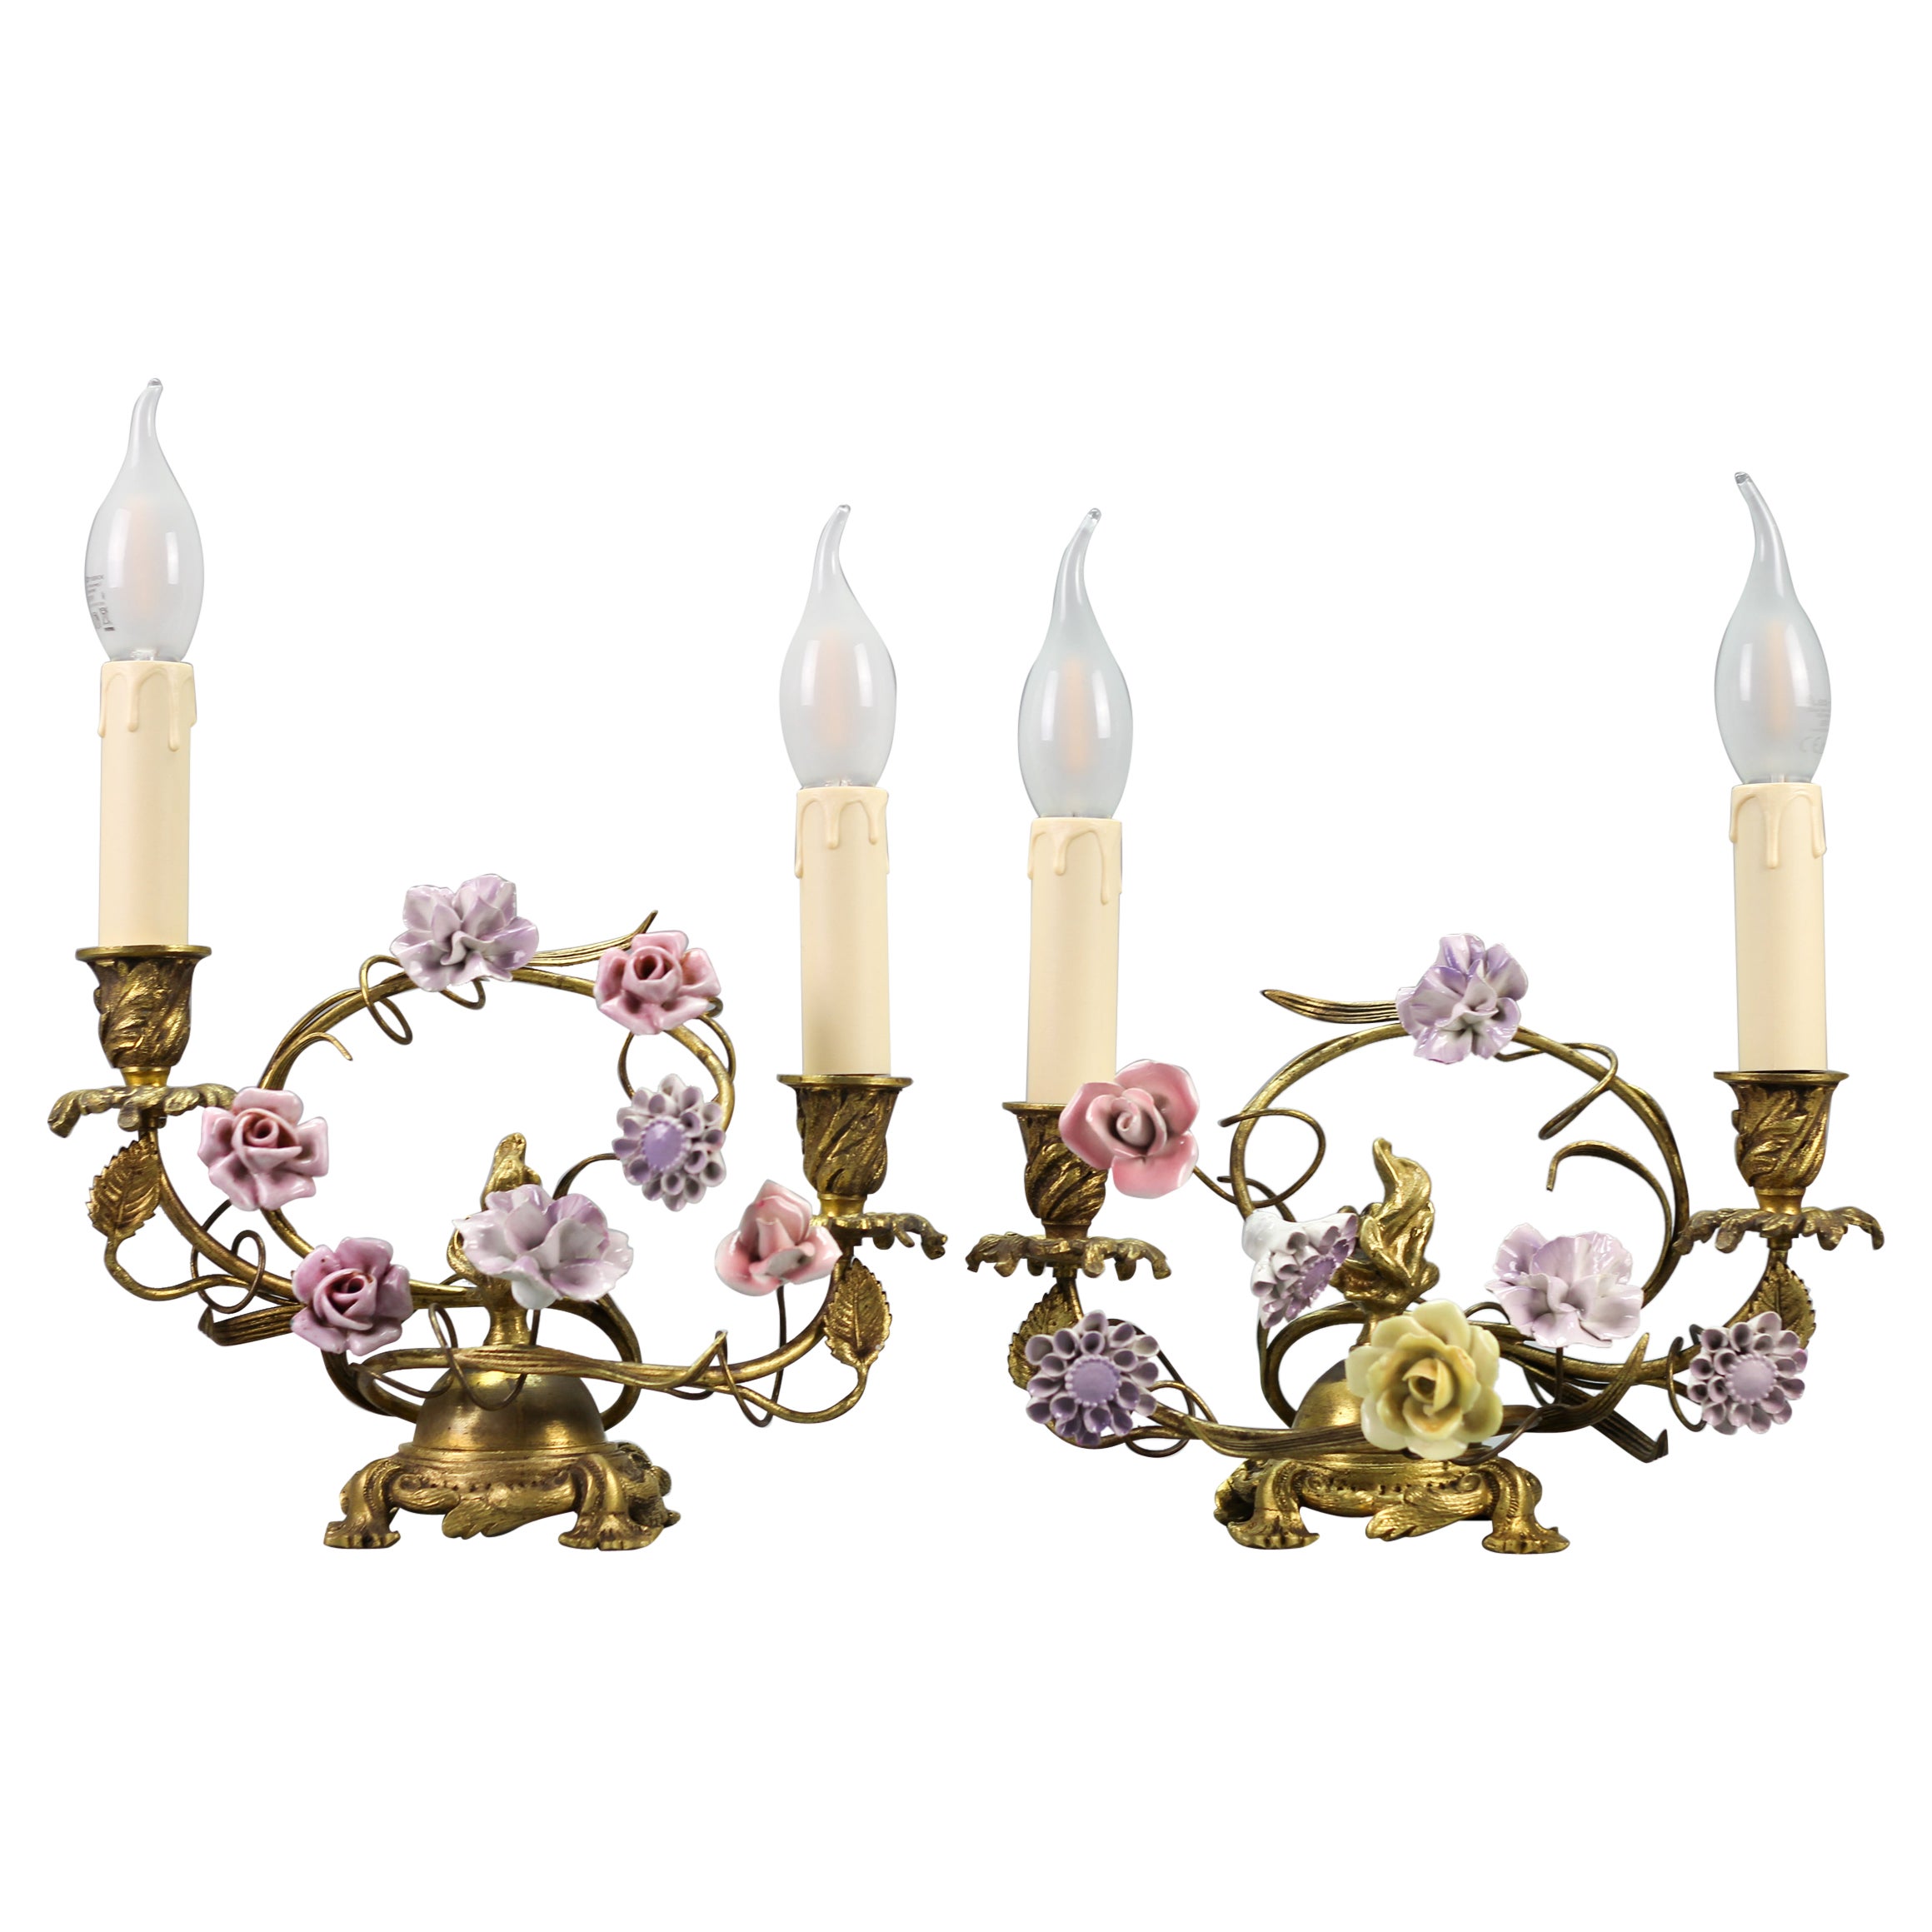 Pair of French Rococo Style Gilt Bronze and Porcelain Flower Table Lamps